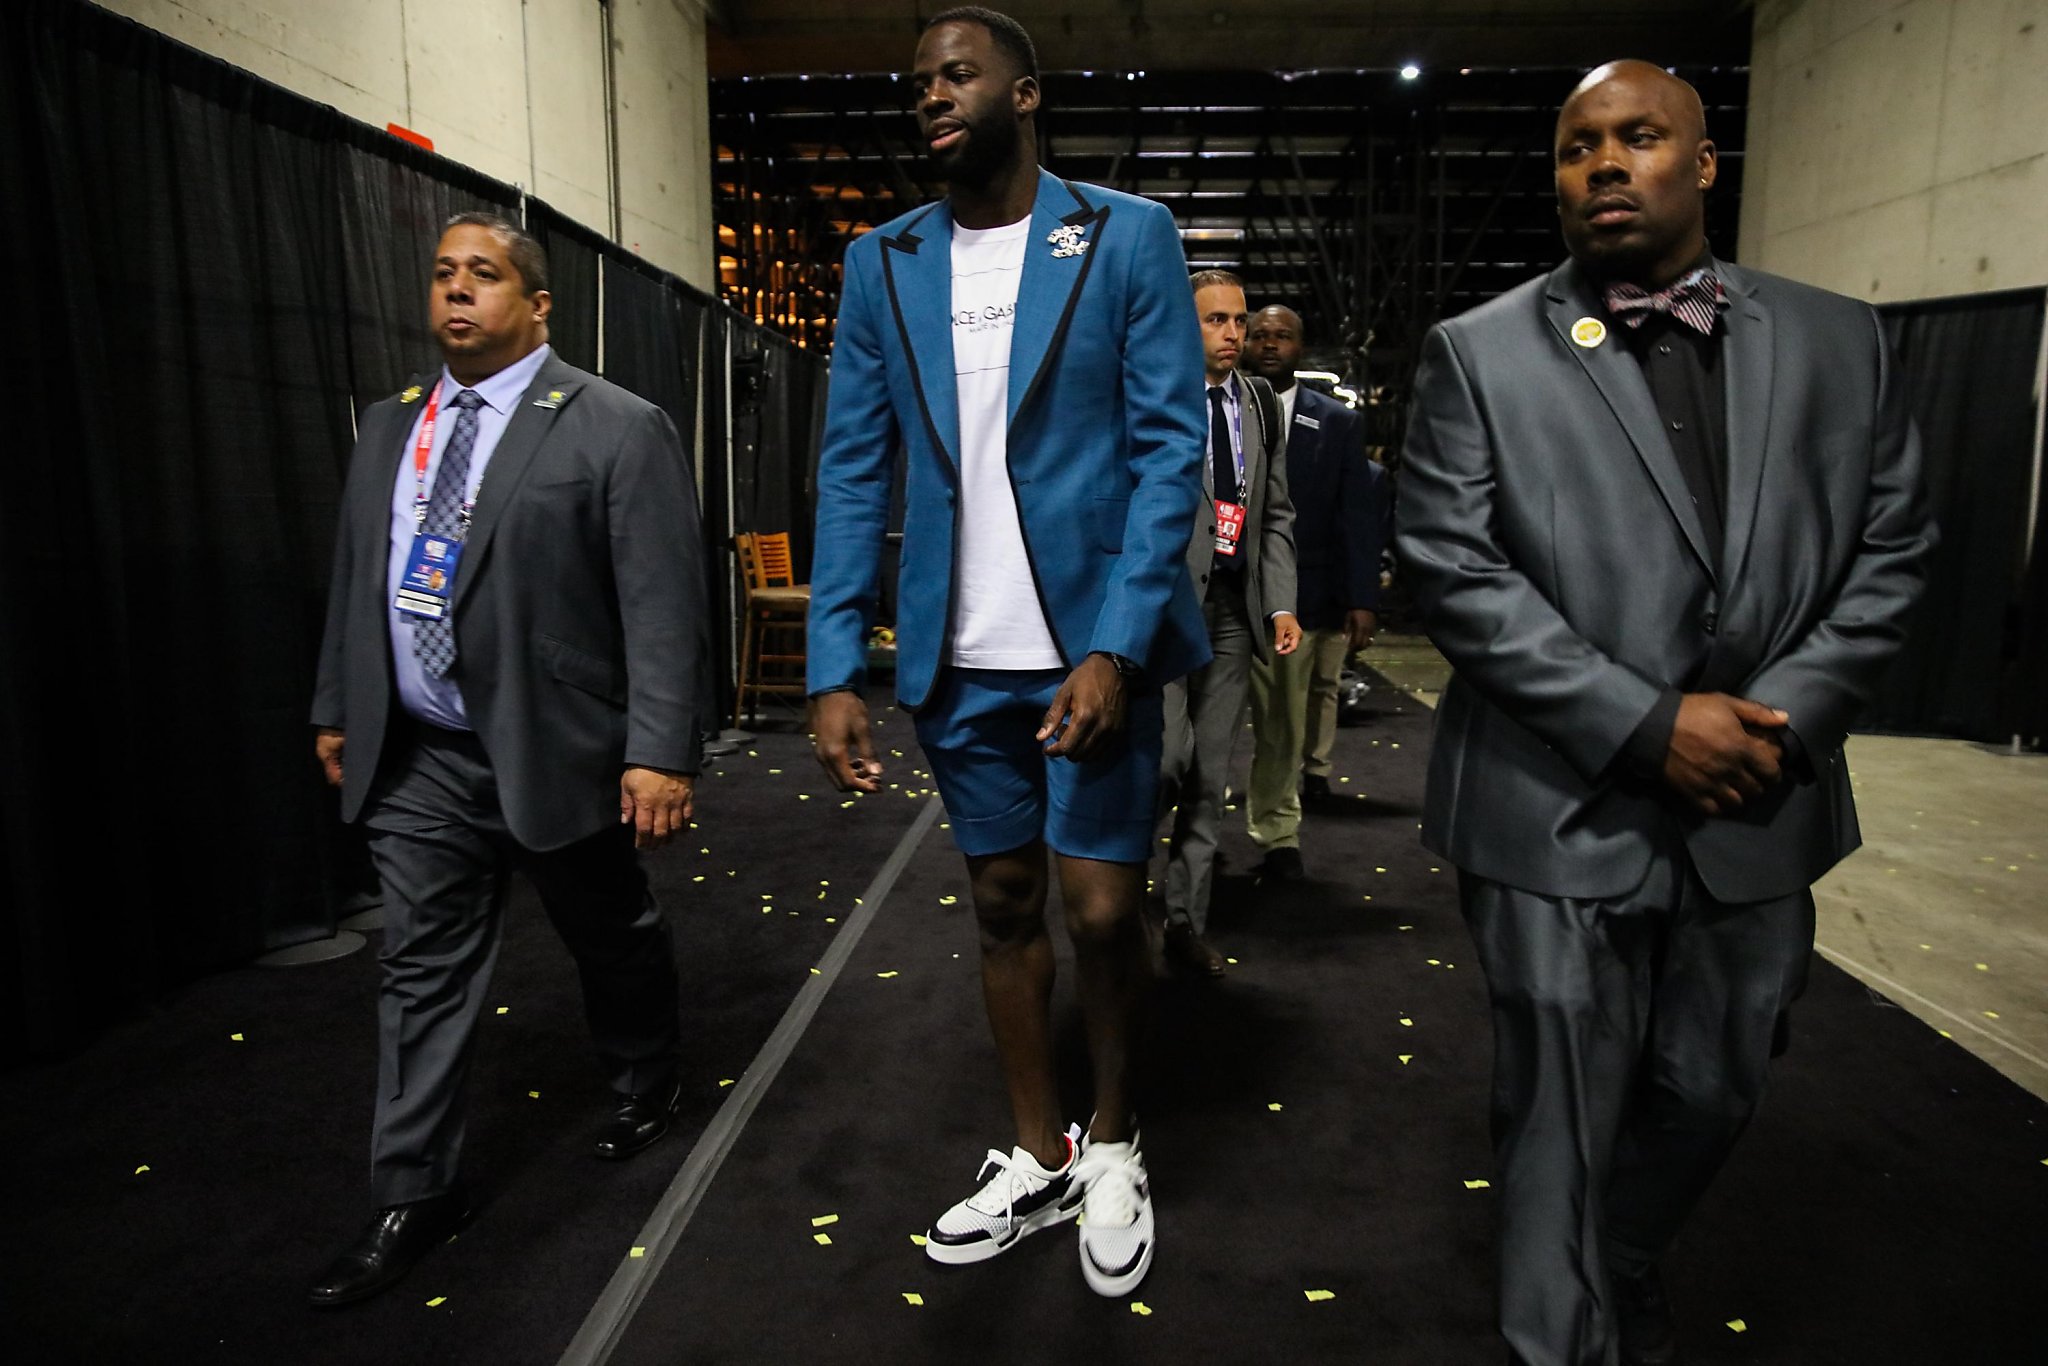 Draymond Green joins LeBron James in the shorts-suit brigade at Game 2 - SFGate